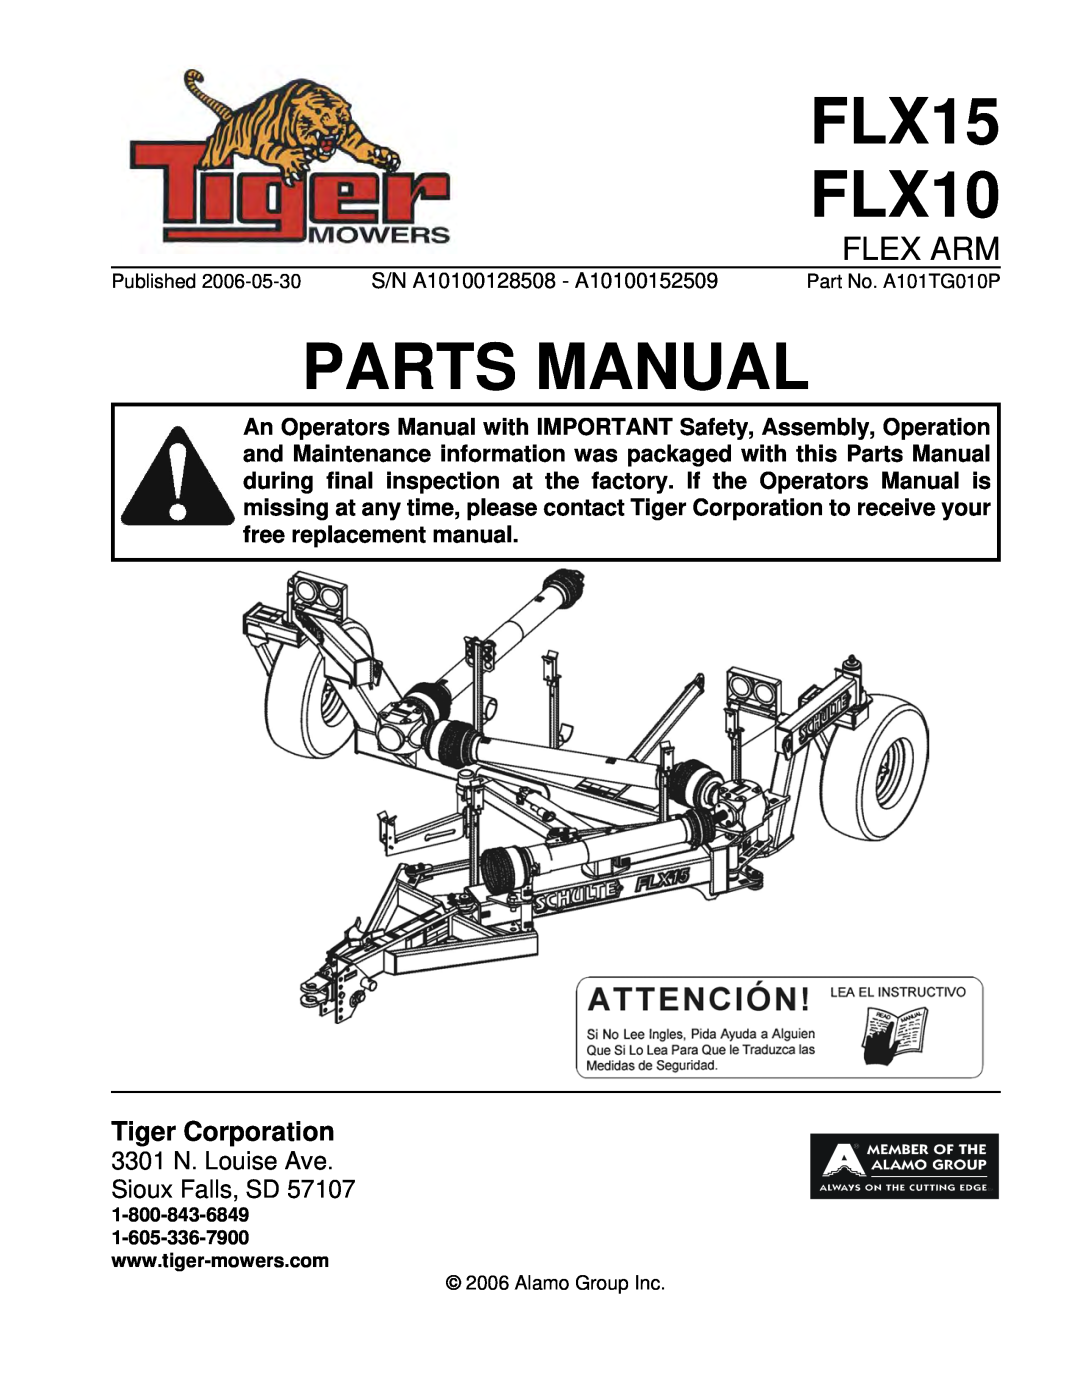 Tiger Mowers FLX15 manual Tiger Corporation, 3301 N. Louise Ave Sioux Falls, SD, FLX10, Parts Manual, Flex Arm 